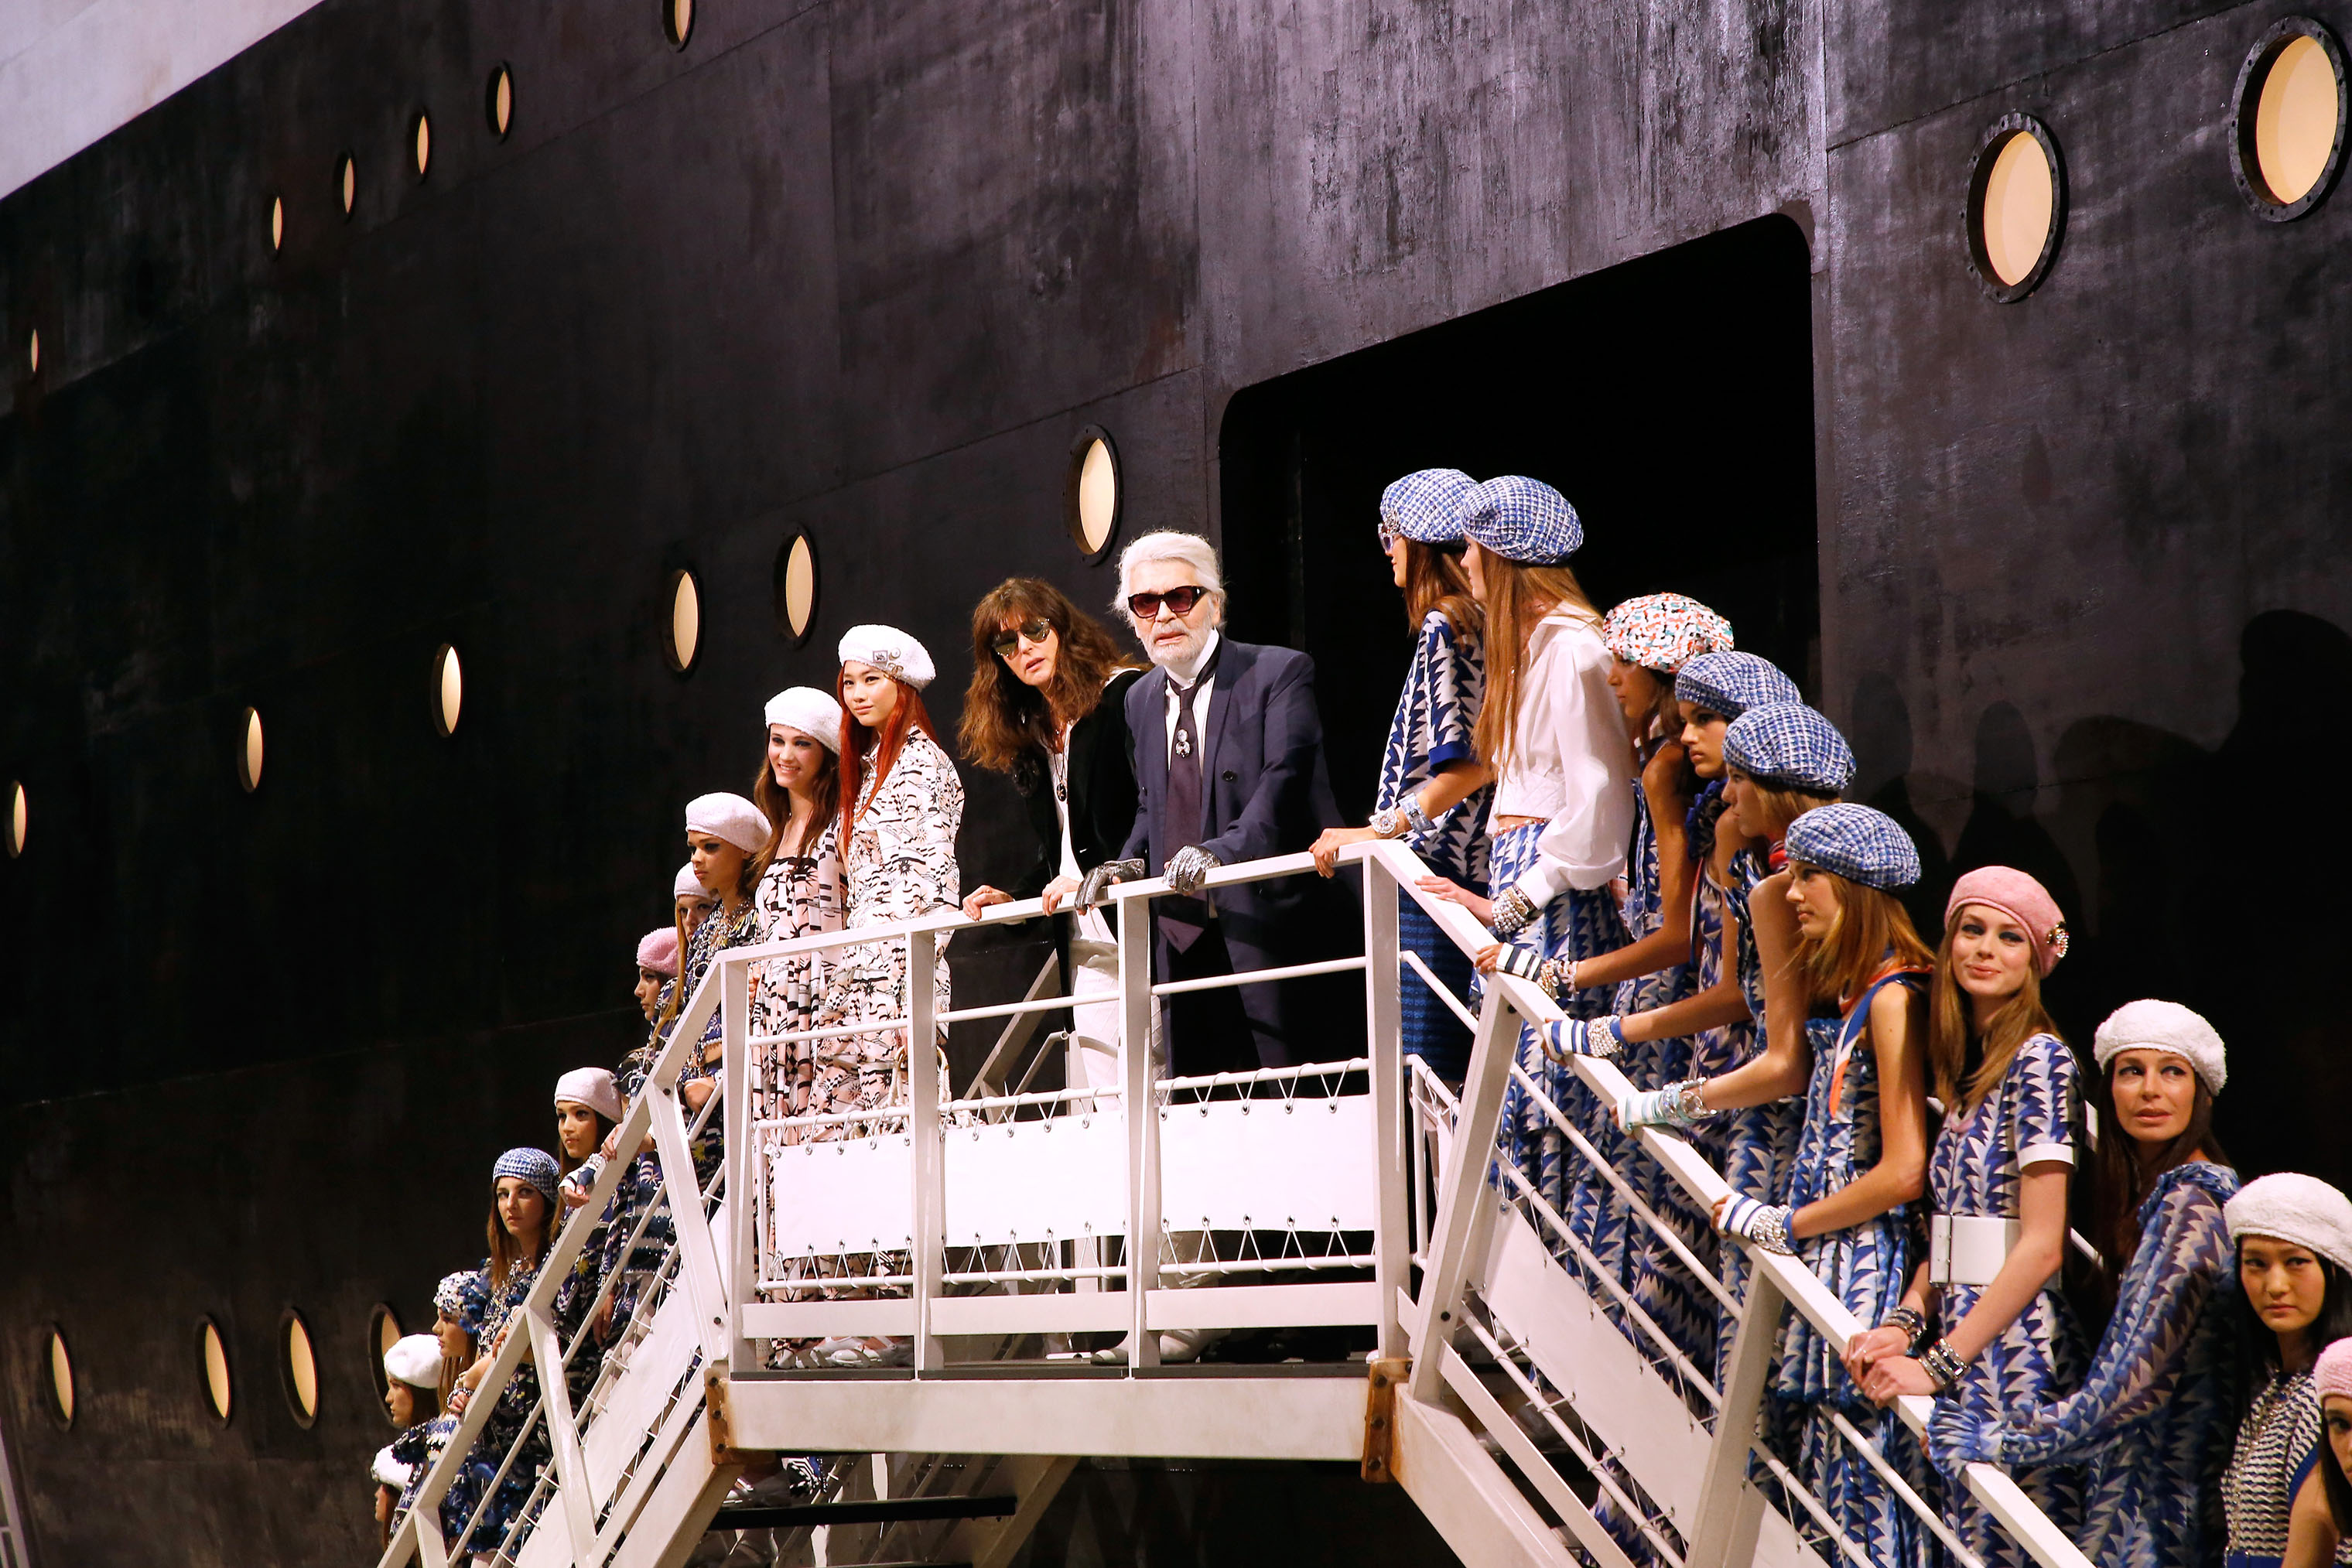 Stylist Karl Lagerfeld, director of Chanel creative studio Virginie Viard and models pose at the end of the Chanel Cruise 2018/2019 Collection at Le Grand Palais on May 3, 2018 in Paris, France. (Bertrand Rindoff Petroff—Getty Images)